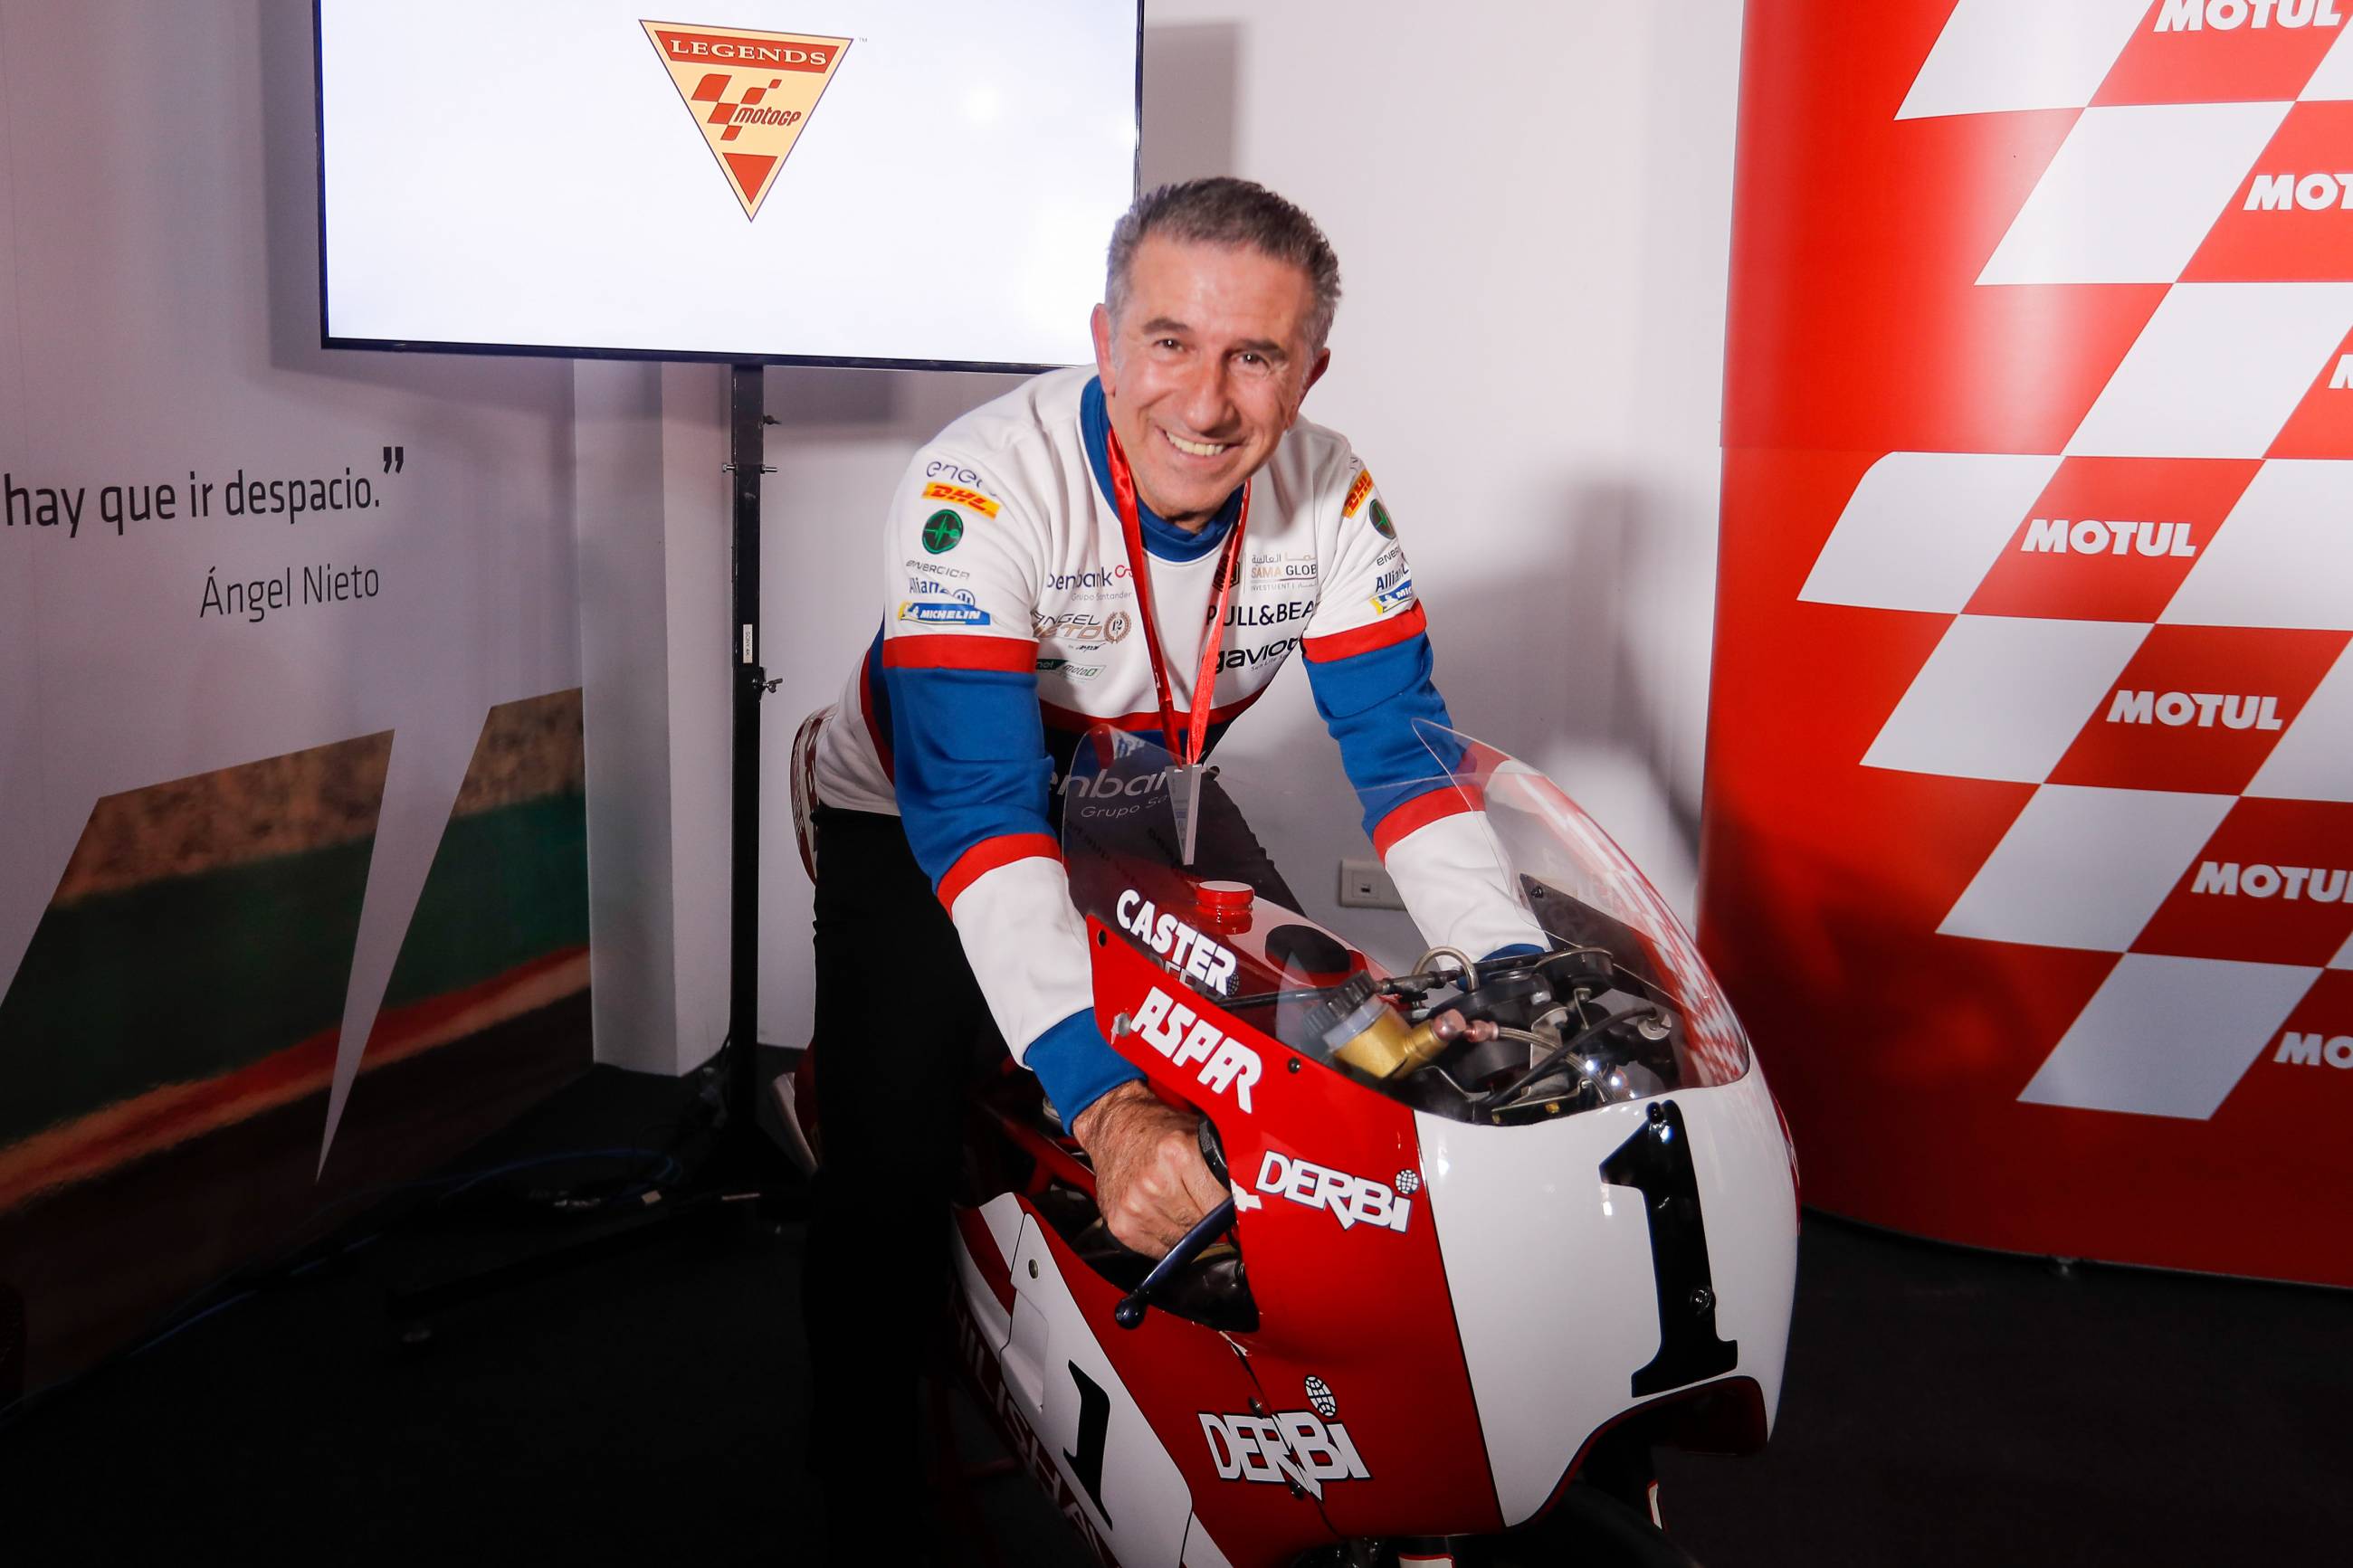 Four-time World Champion Jorge Martínez “Aspar” joins a select group of riders in the history of Grand Prix racing, including the likes of Ángel Nieto and Giacomo Agostini, as a MotoGP Legend.